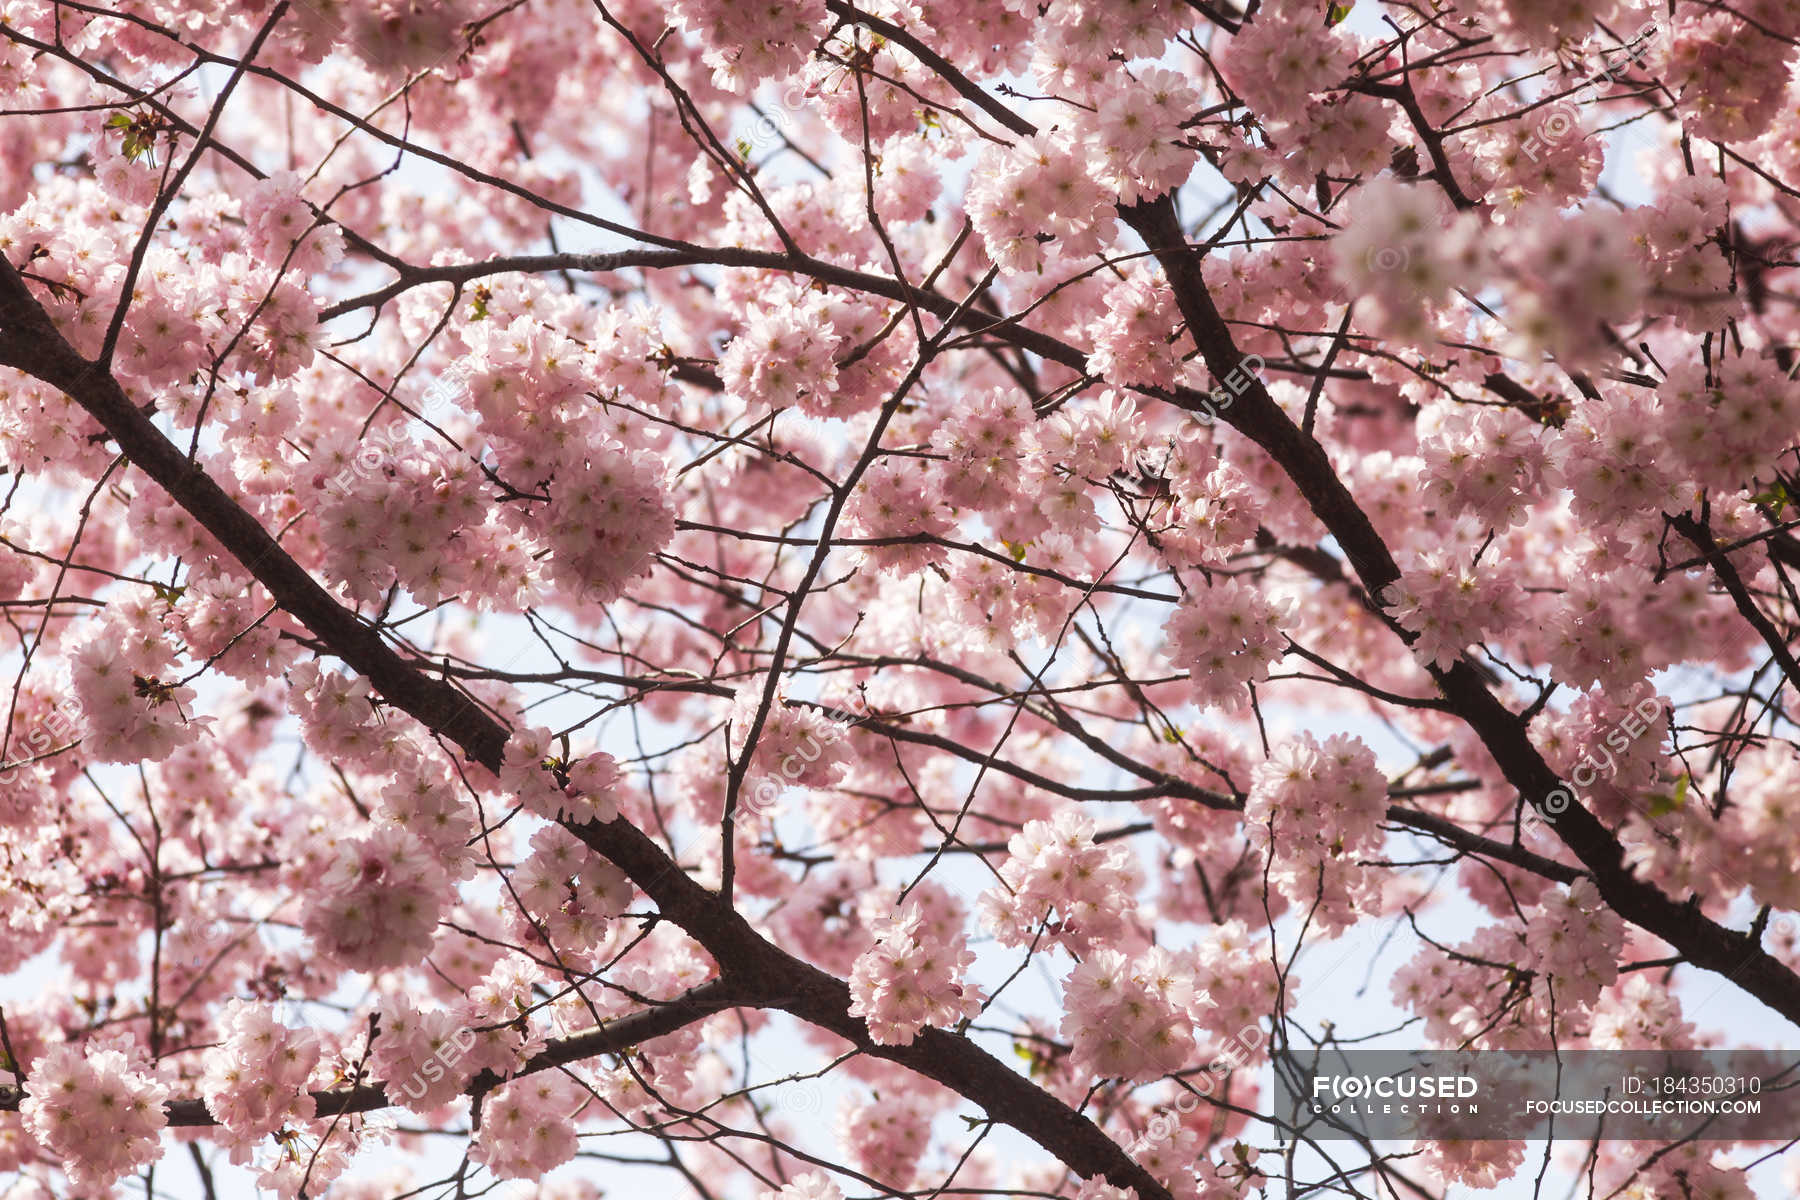 Blossoming tree branches in spring — Stock Photo | #184350310